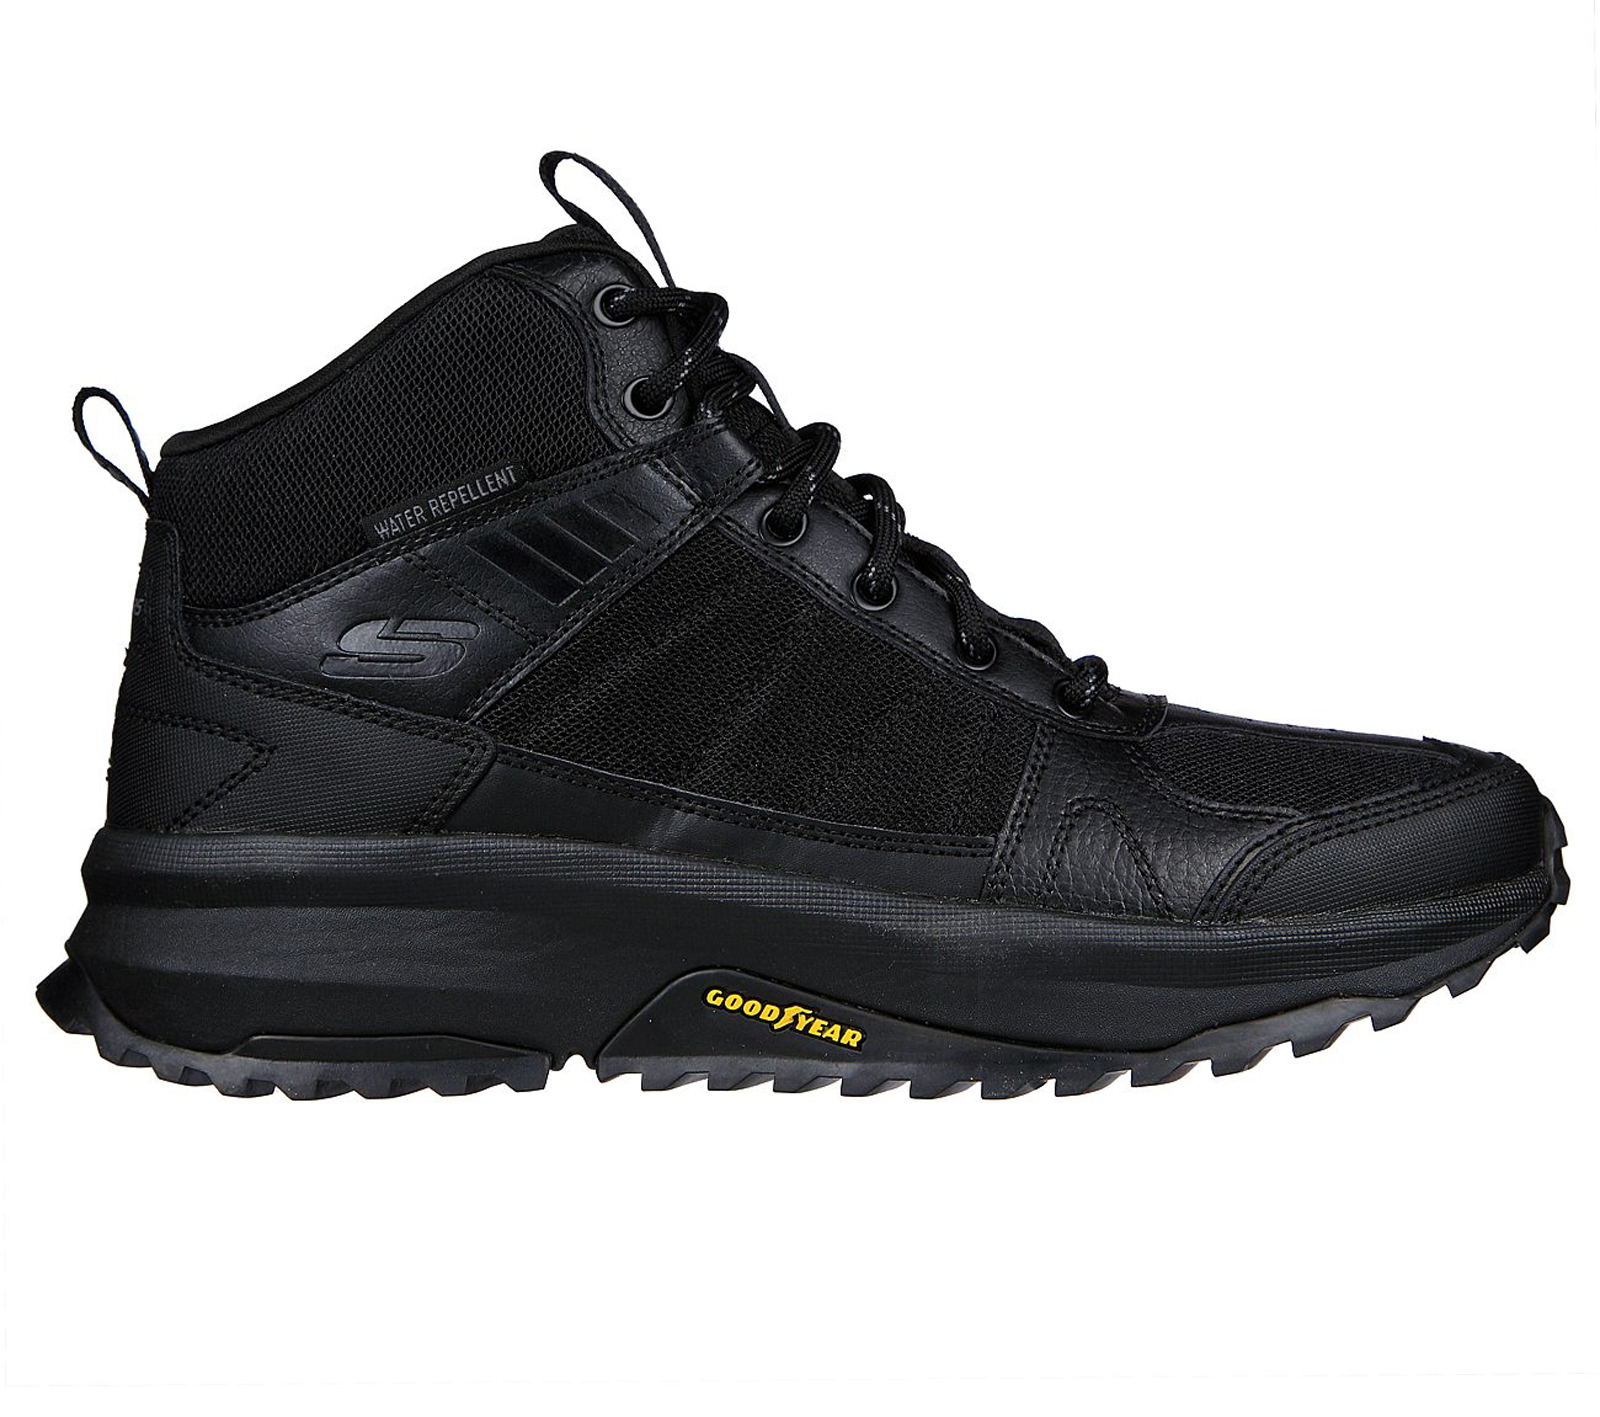 Skechers - GOODYEAR MESH LACE-UP OUTDOOR SHOE W/ AIR-COOLED MEMORY FOAM - ΜΑΥΡΟ Ανδρικά > Παπούτσια > Αθλητικά > Παπούτσι Low Cut